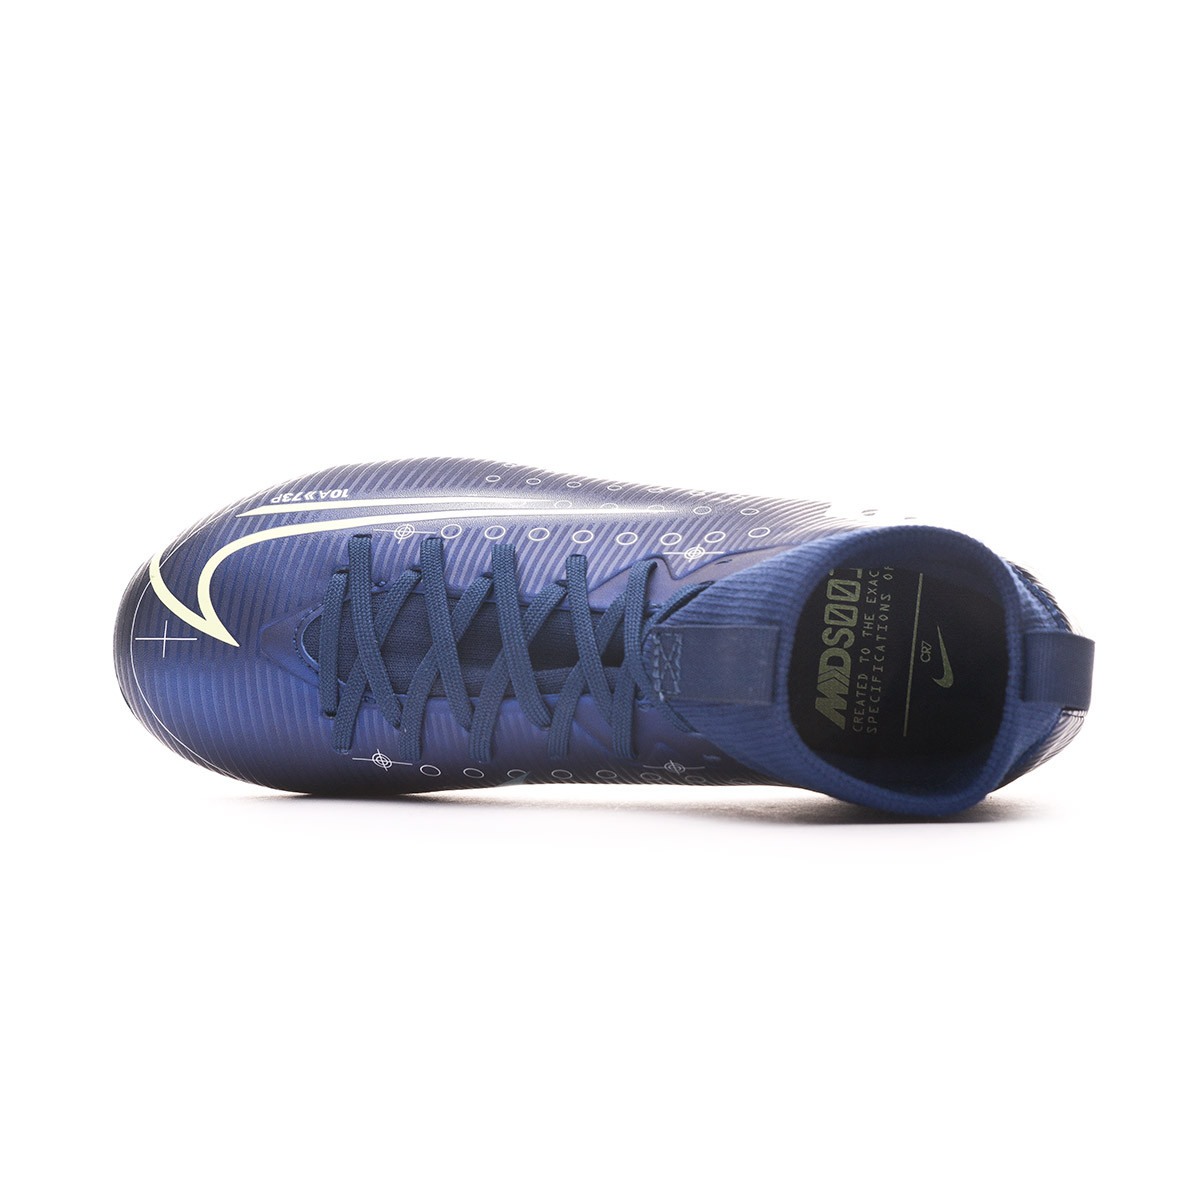 Indoor court shoes Nike JR SUPERFLY 6 ACADEMY.